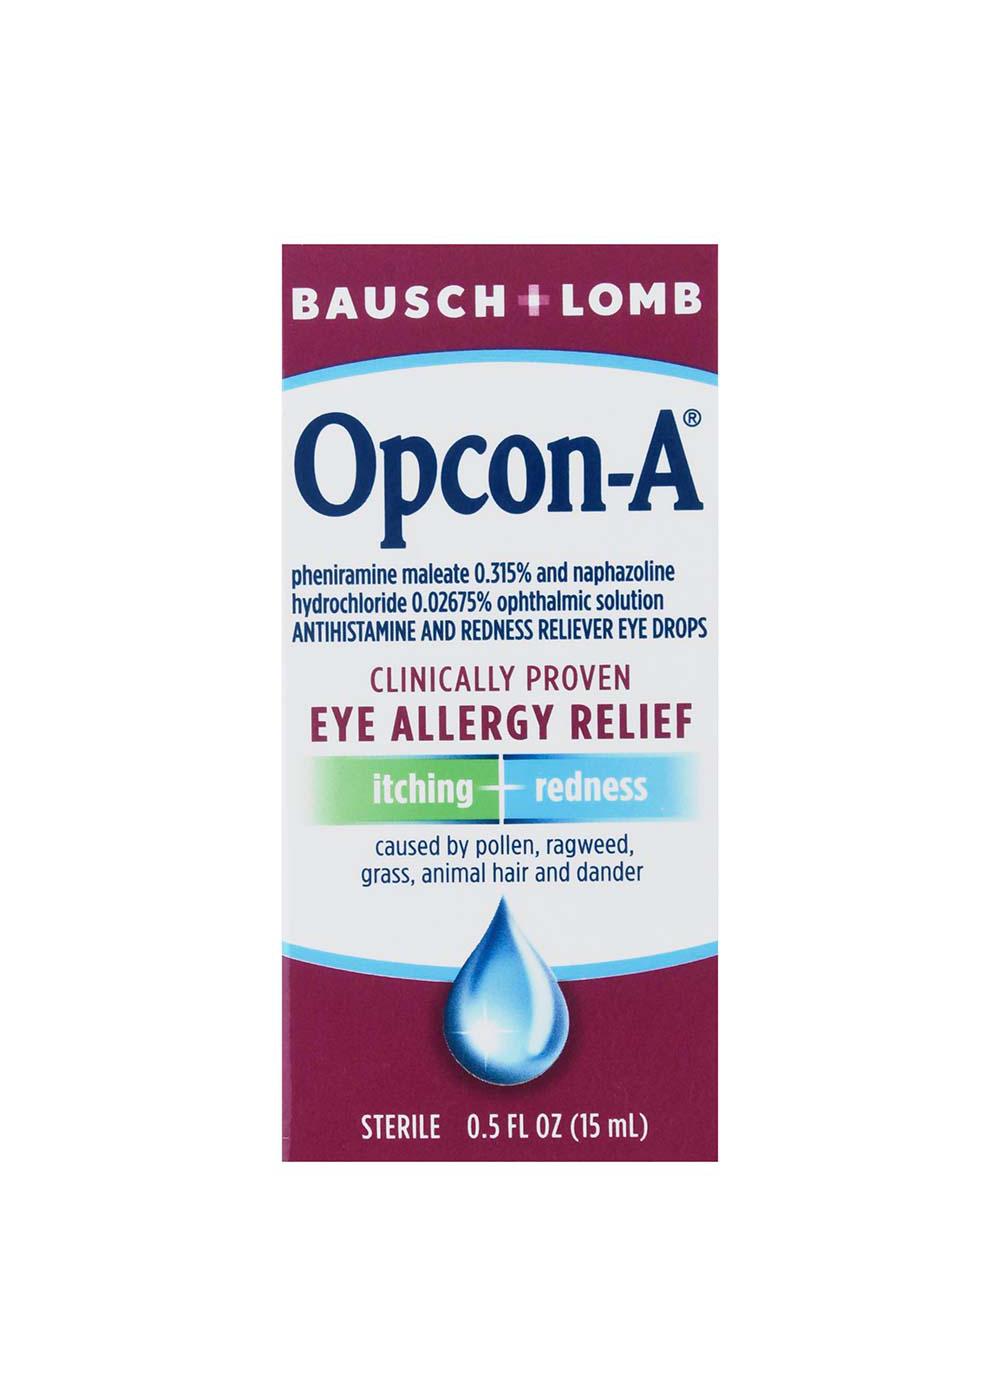 Bausch & Lomb Opcon-A Eye Allergy Relief Drops; image 1 of 3